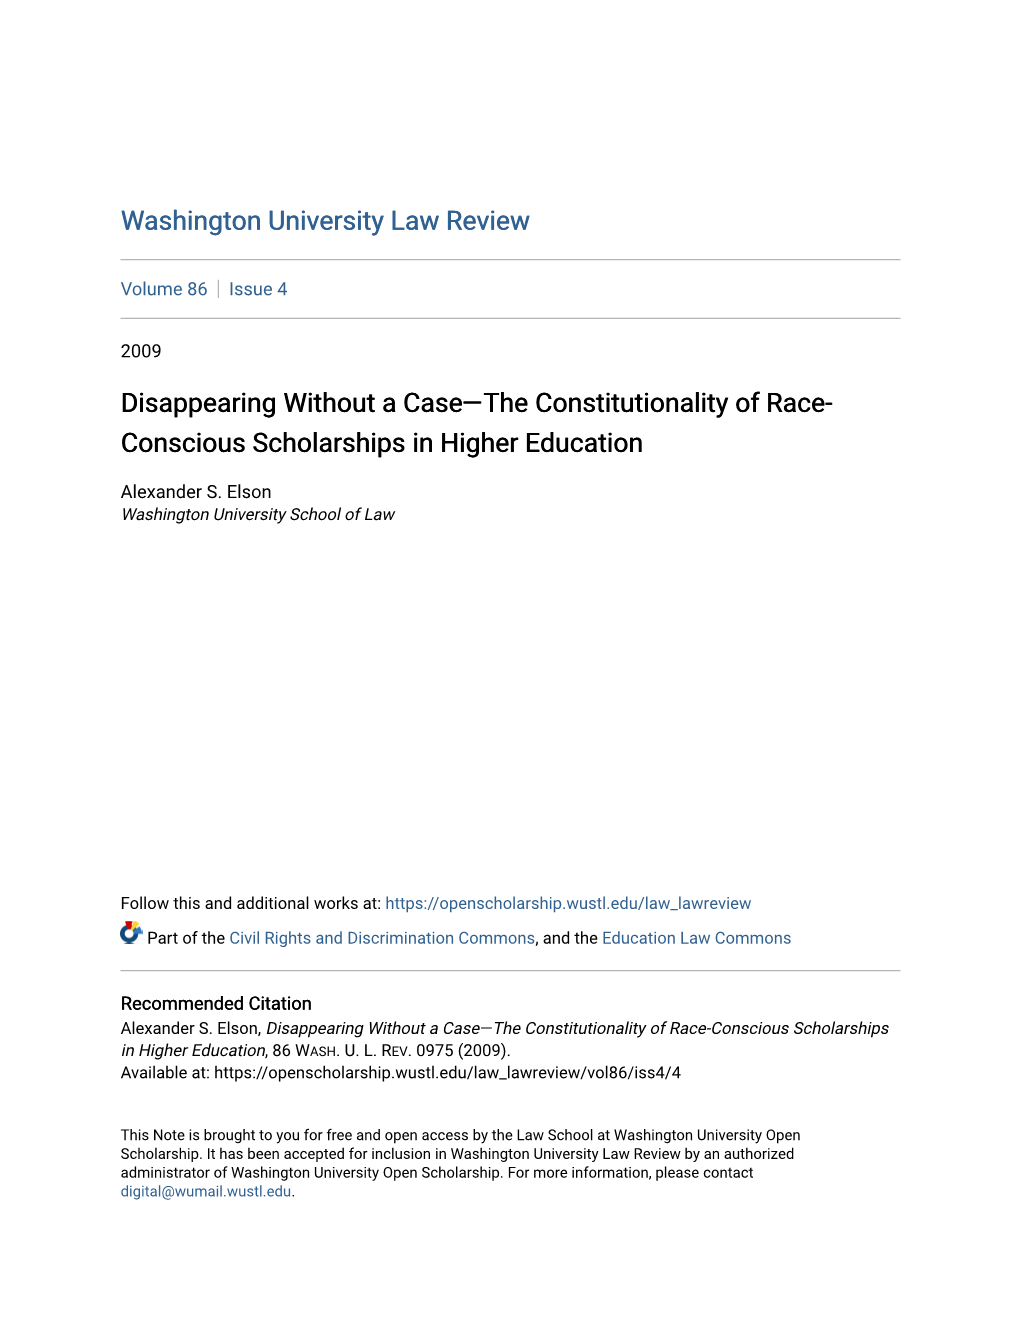 Disappearing Without a Case—The Constitutionality of Race-Conscious Scholarships in Higher Education, 86 WASH